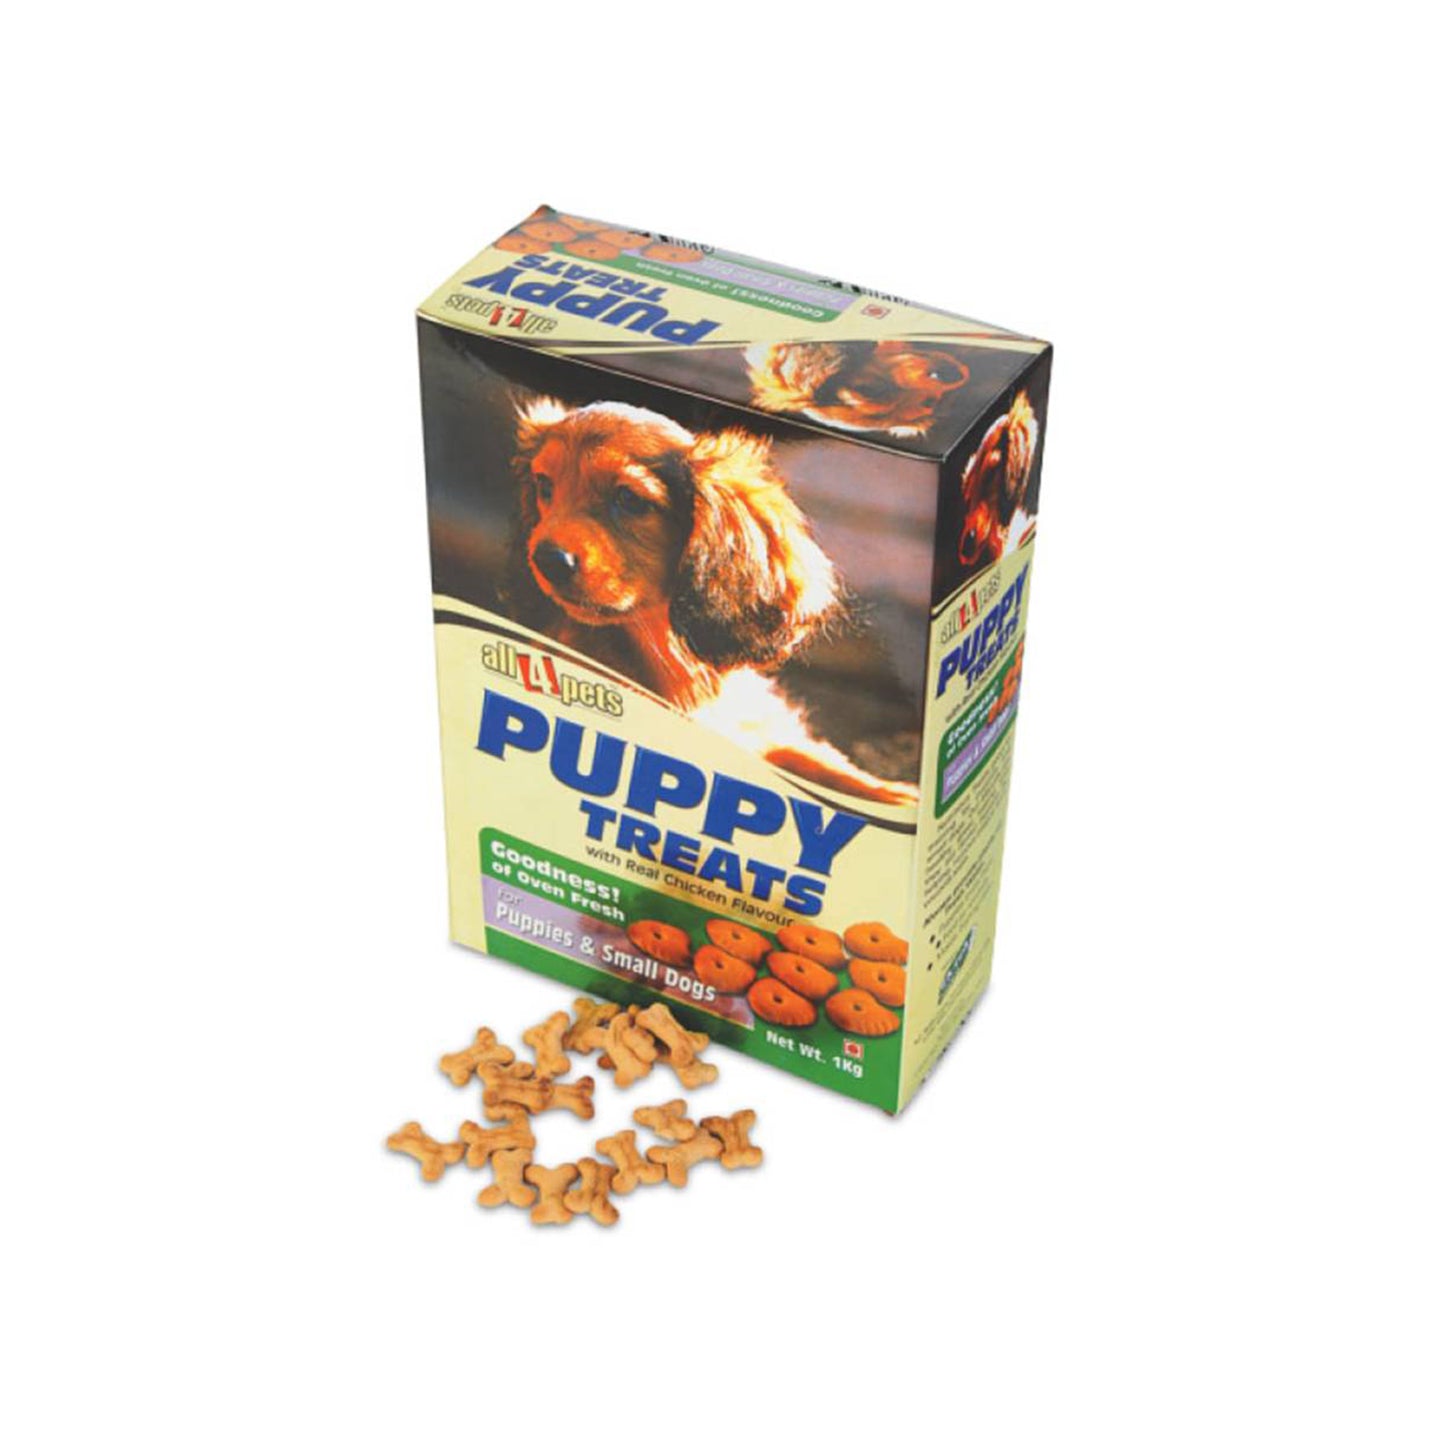 All4pets - Puppy Treat Biscuits